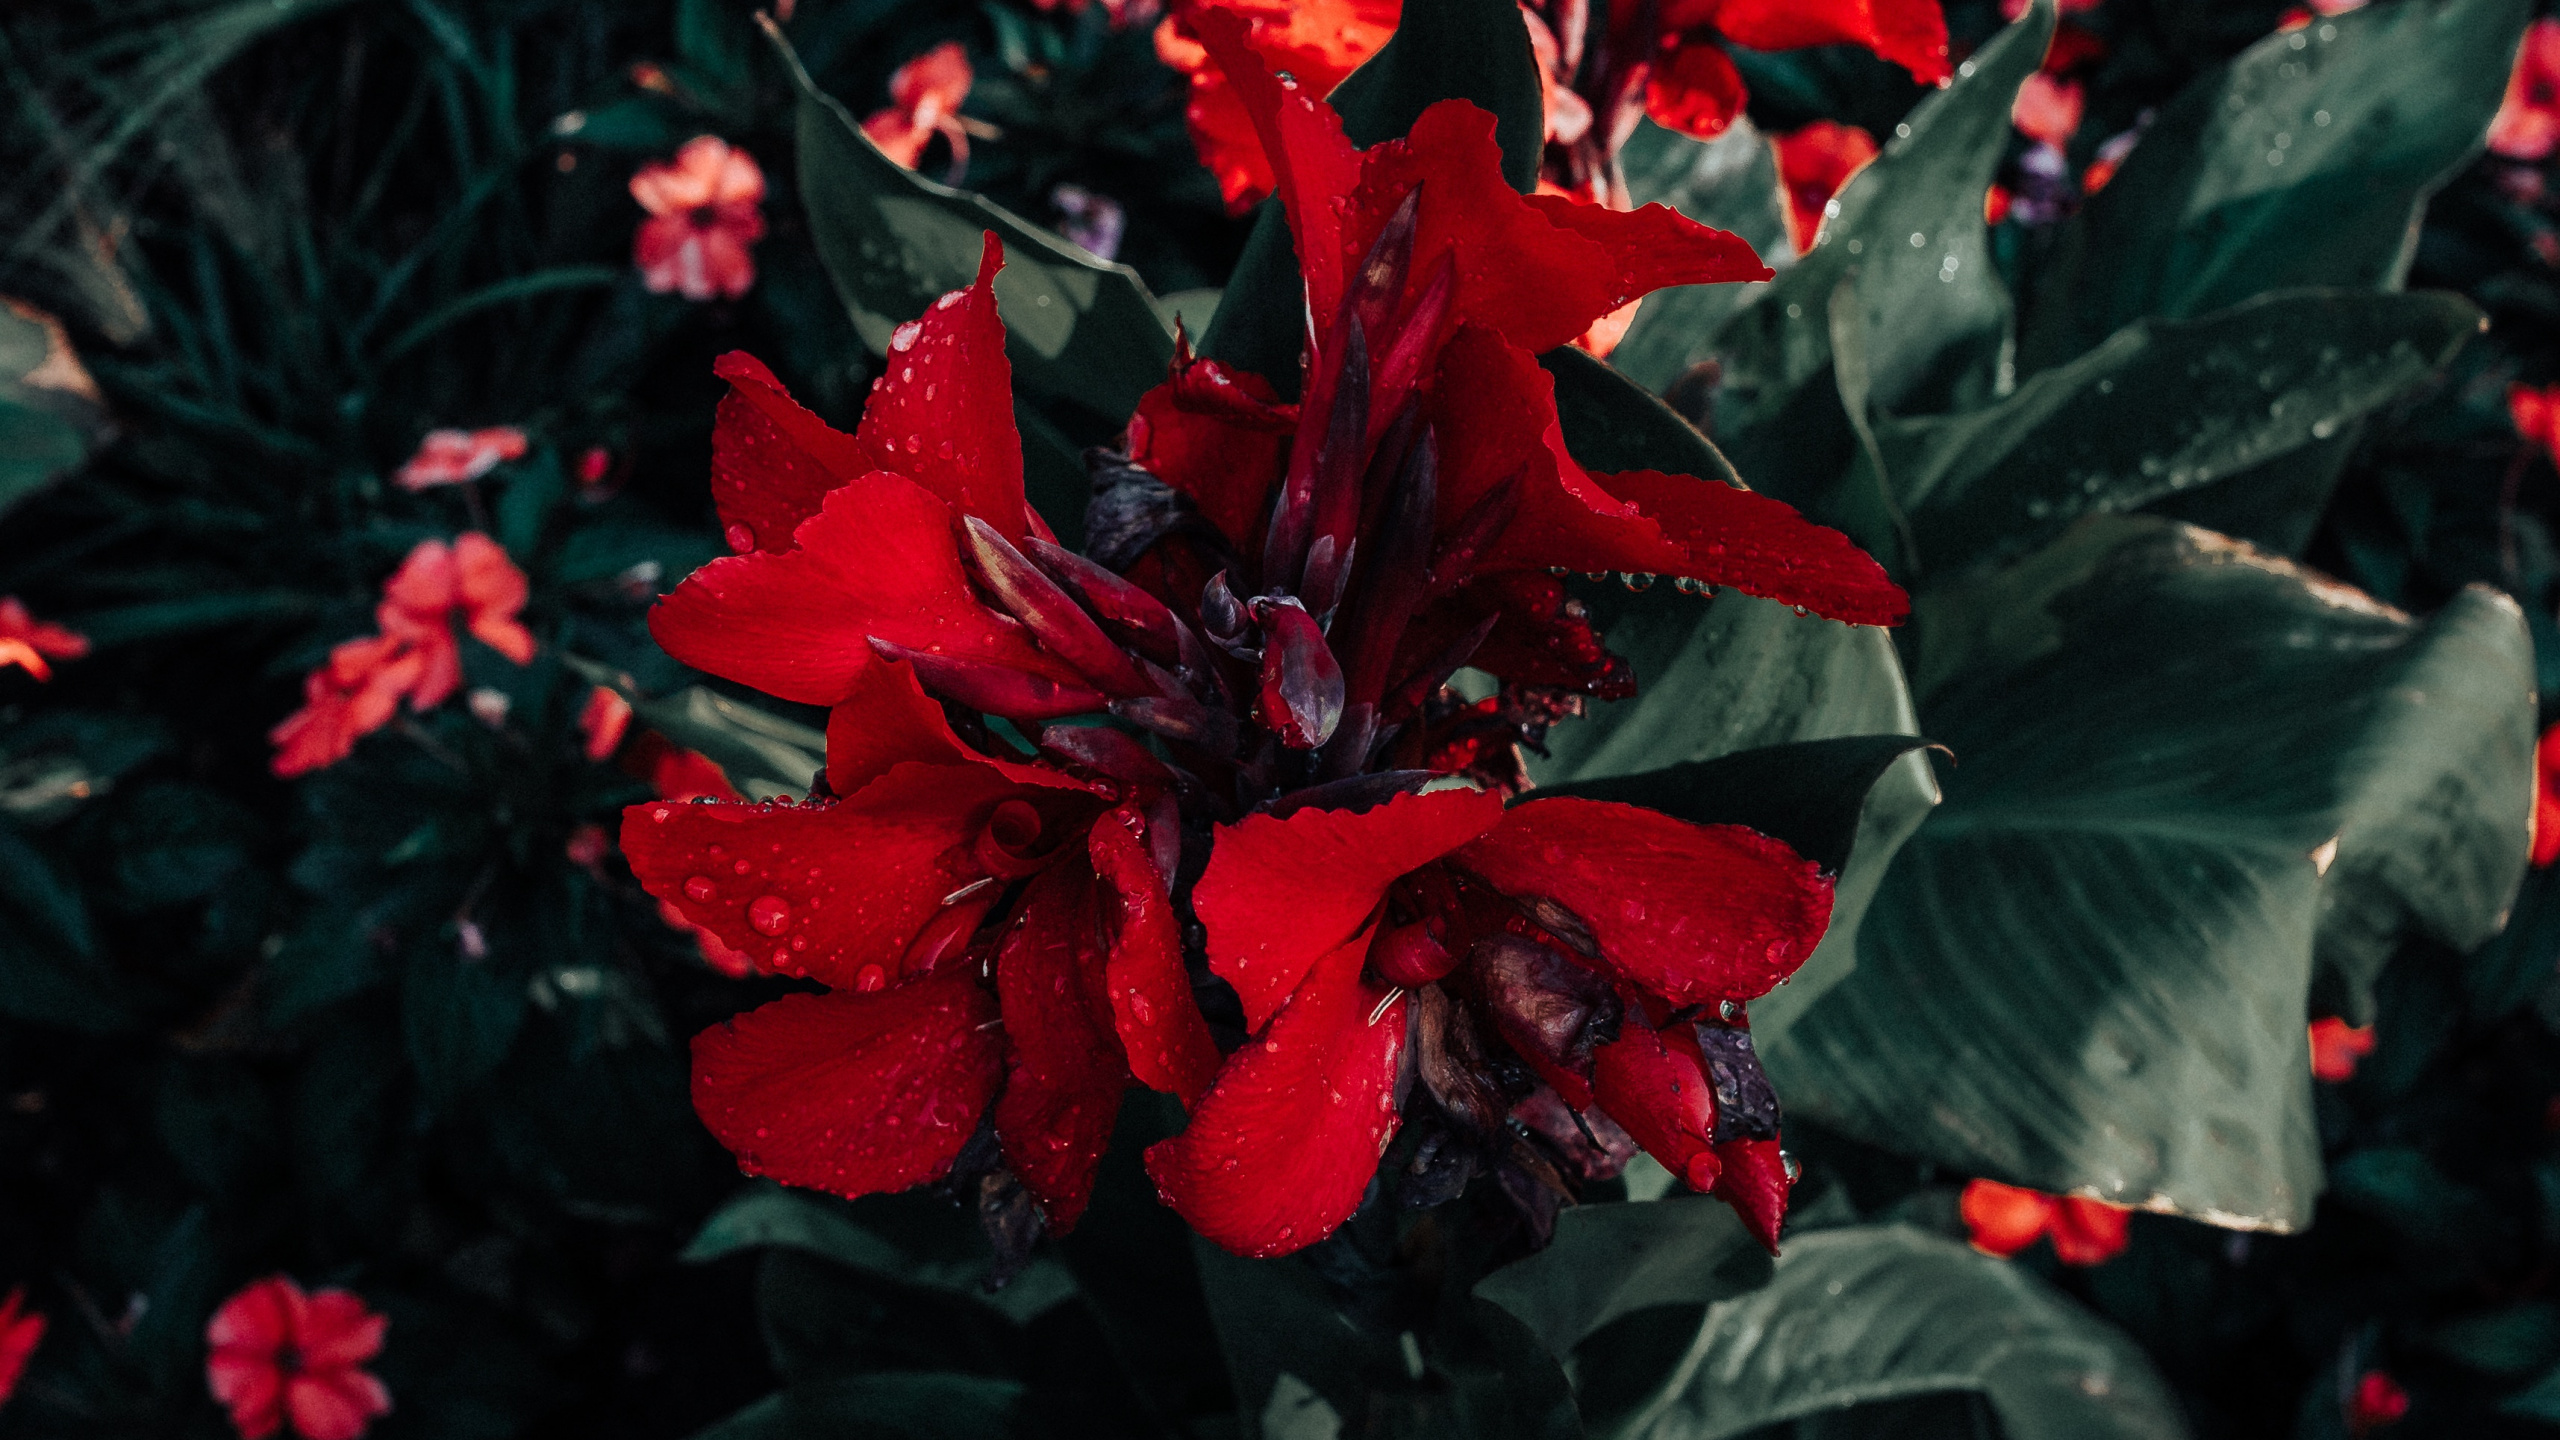 Red Flowers With Green Leaves. Wallpaper in 2560x1440 Resolution